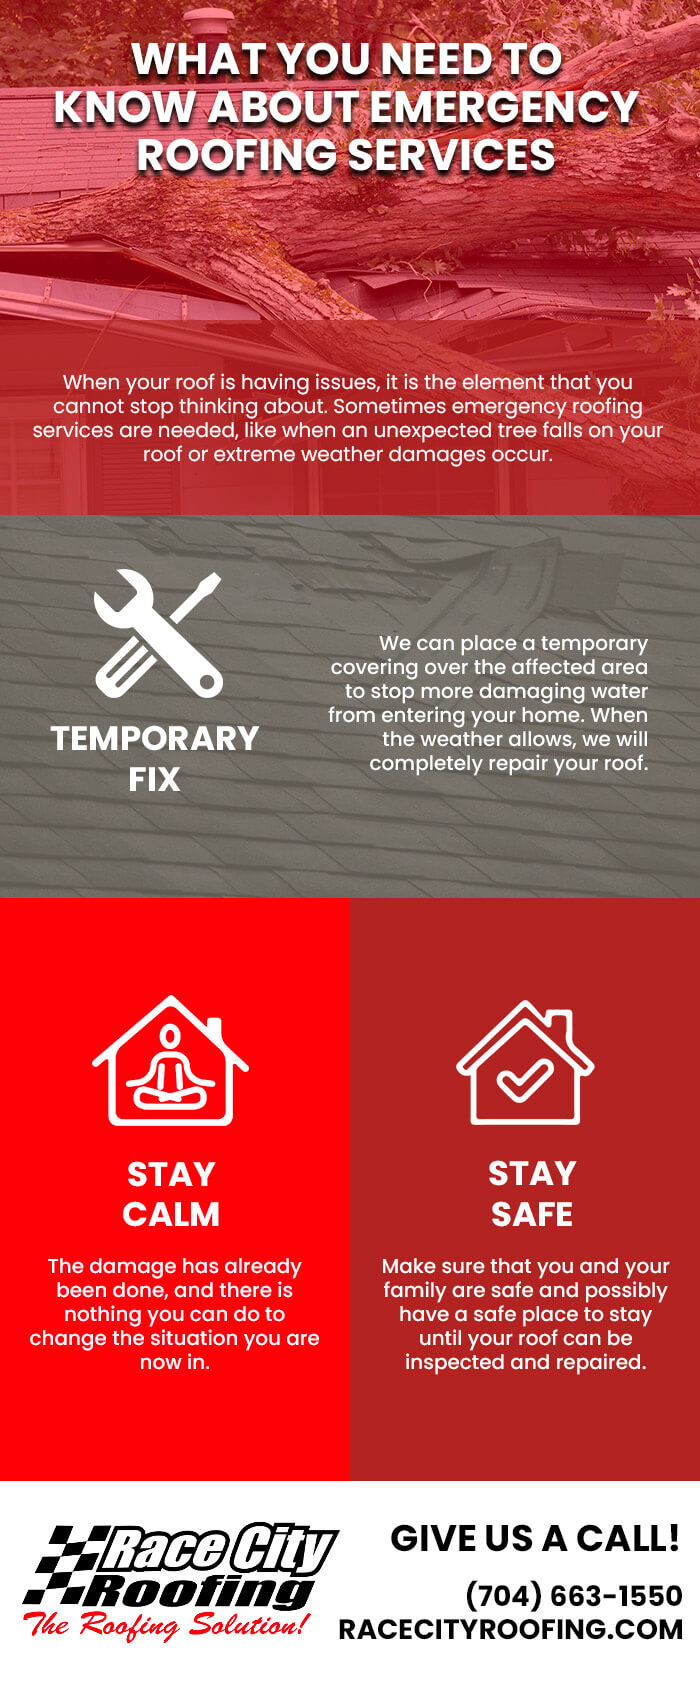 What You Need to Know About Emergency Roofing Services [infographic]